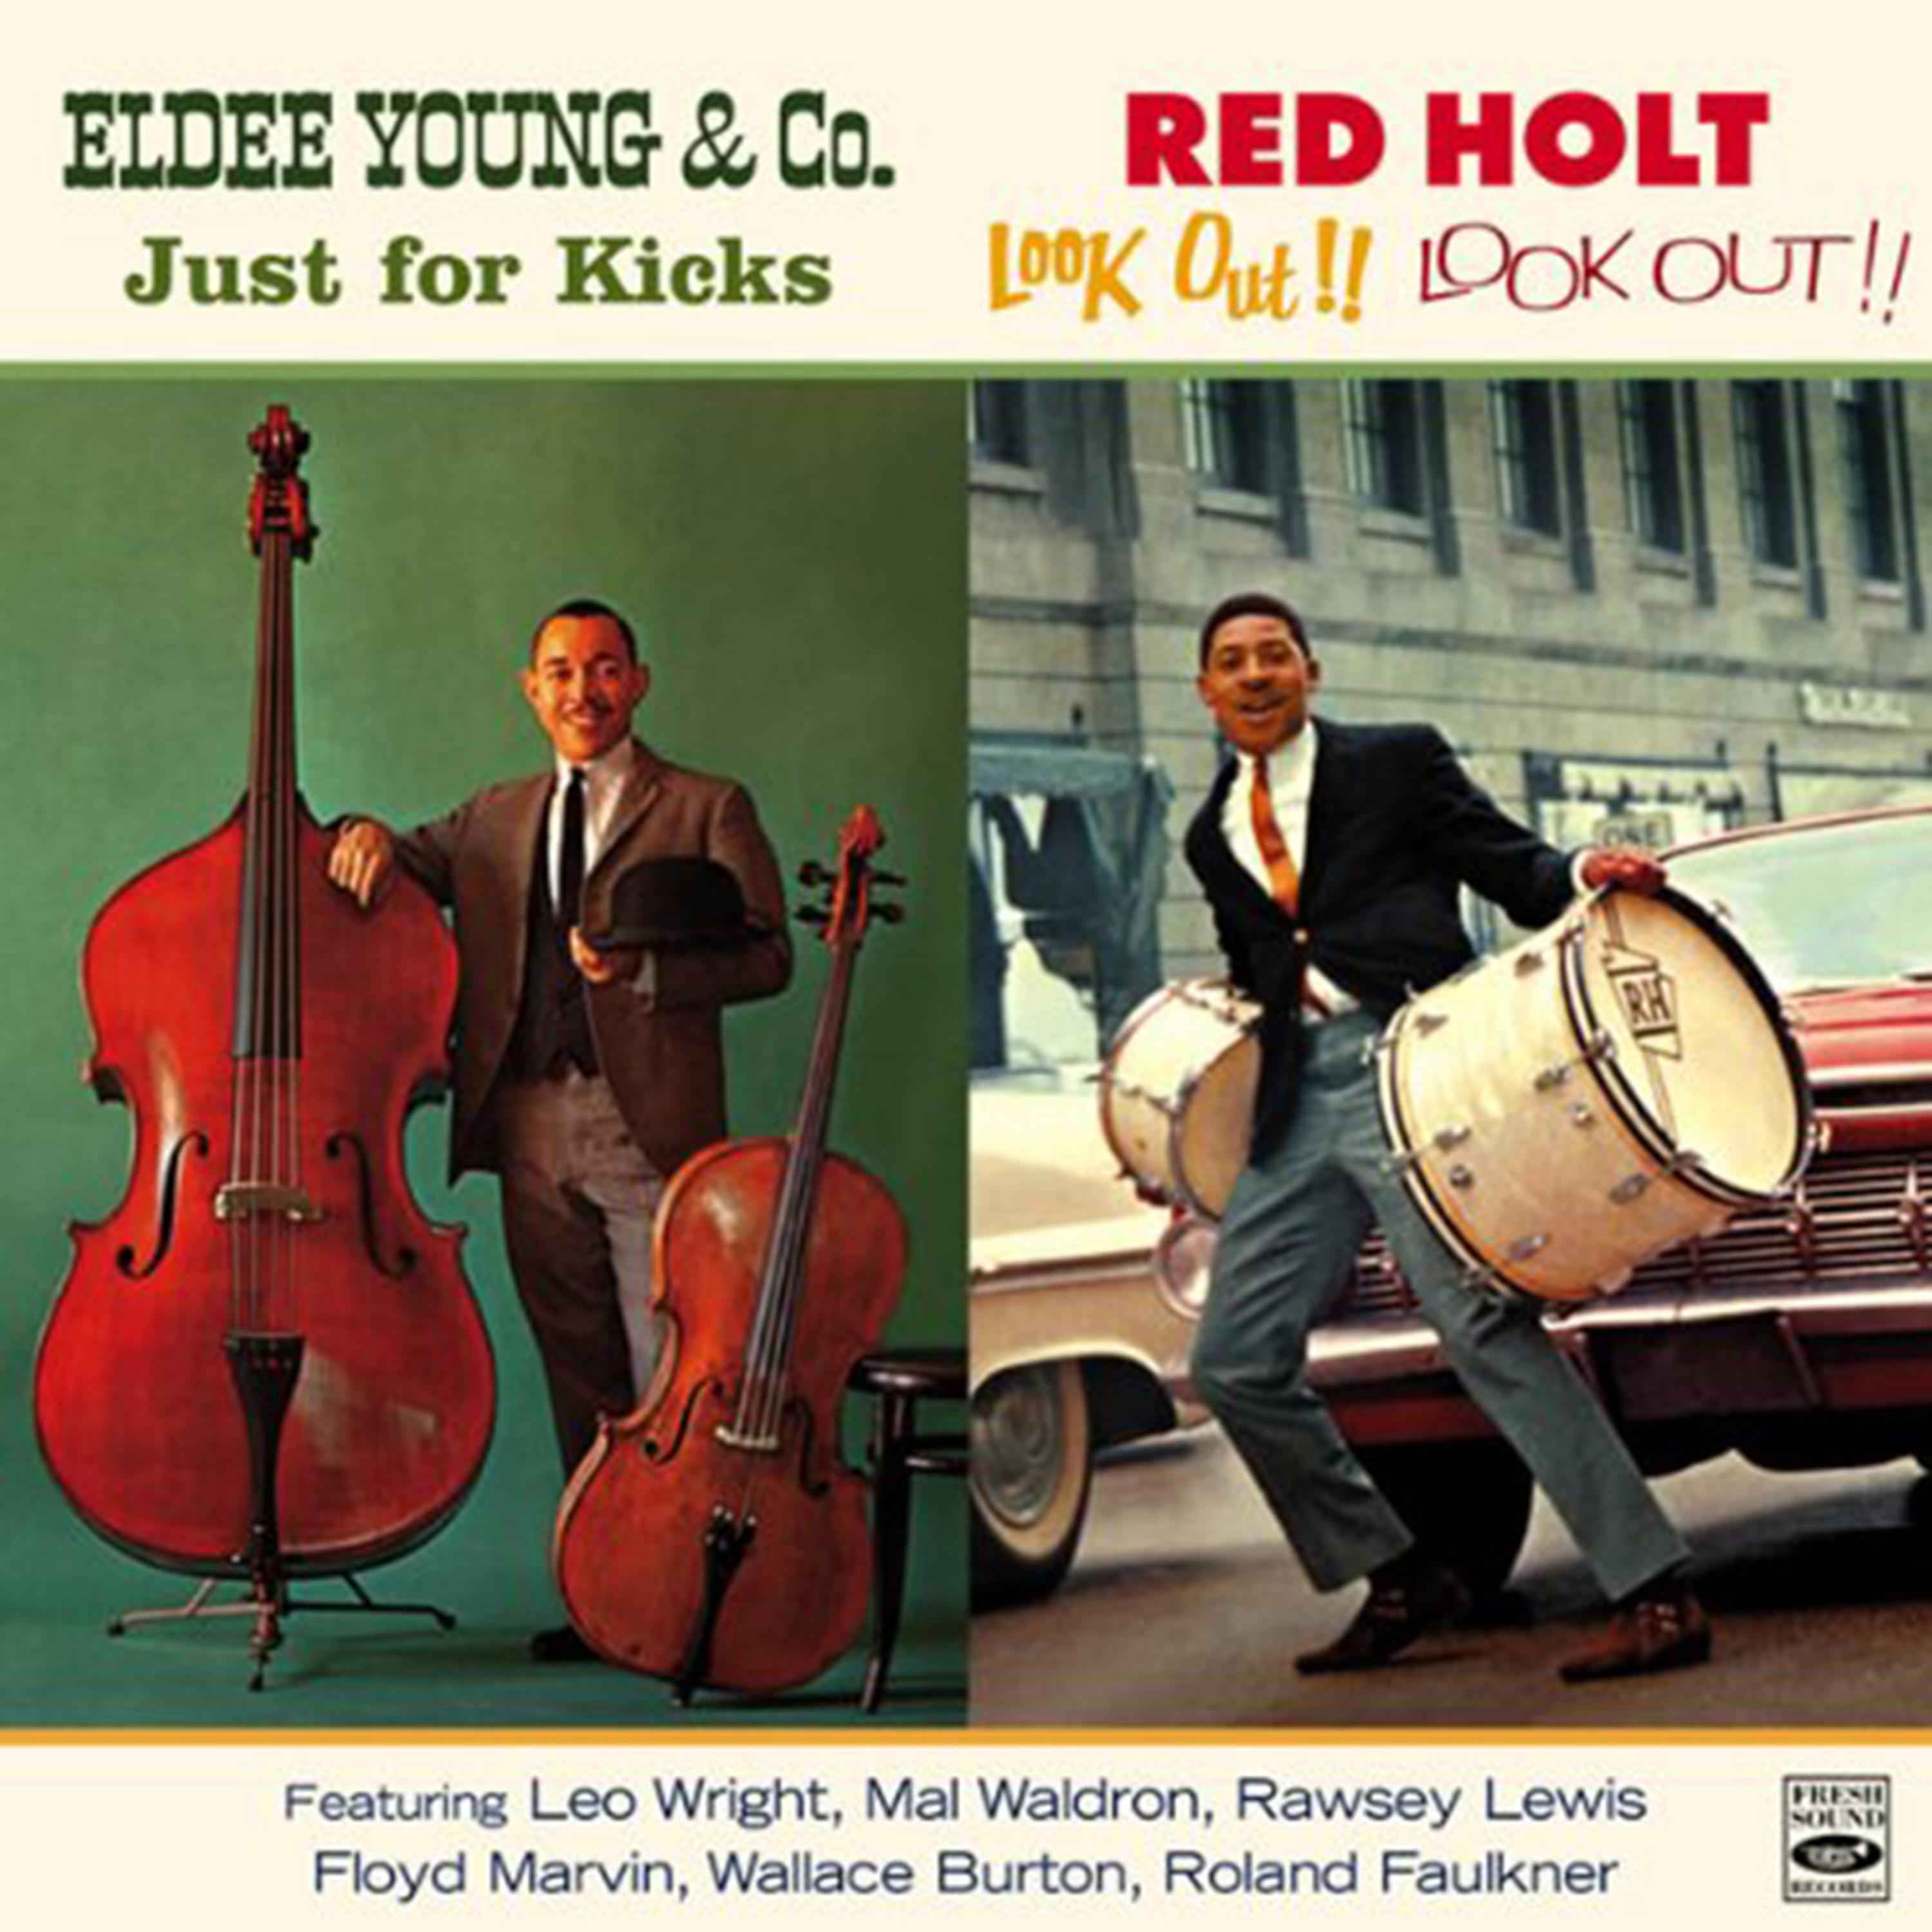 Постер альбома Eldee Young & Co. "Just for Kicks" / 'Red' Holt "Look Out!! Look Out!!"